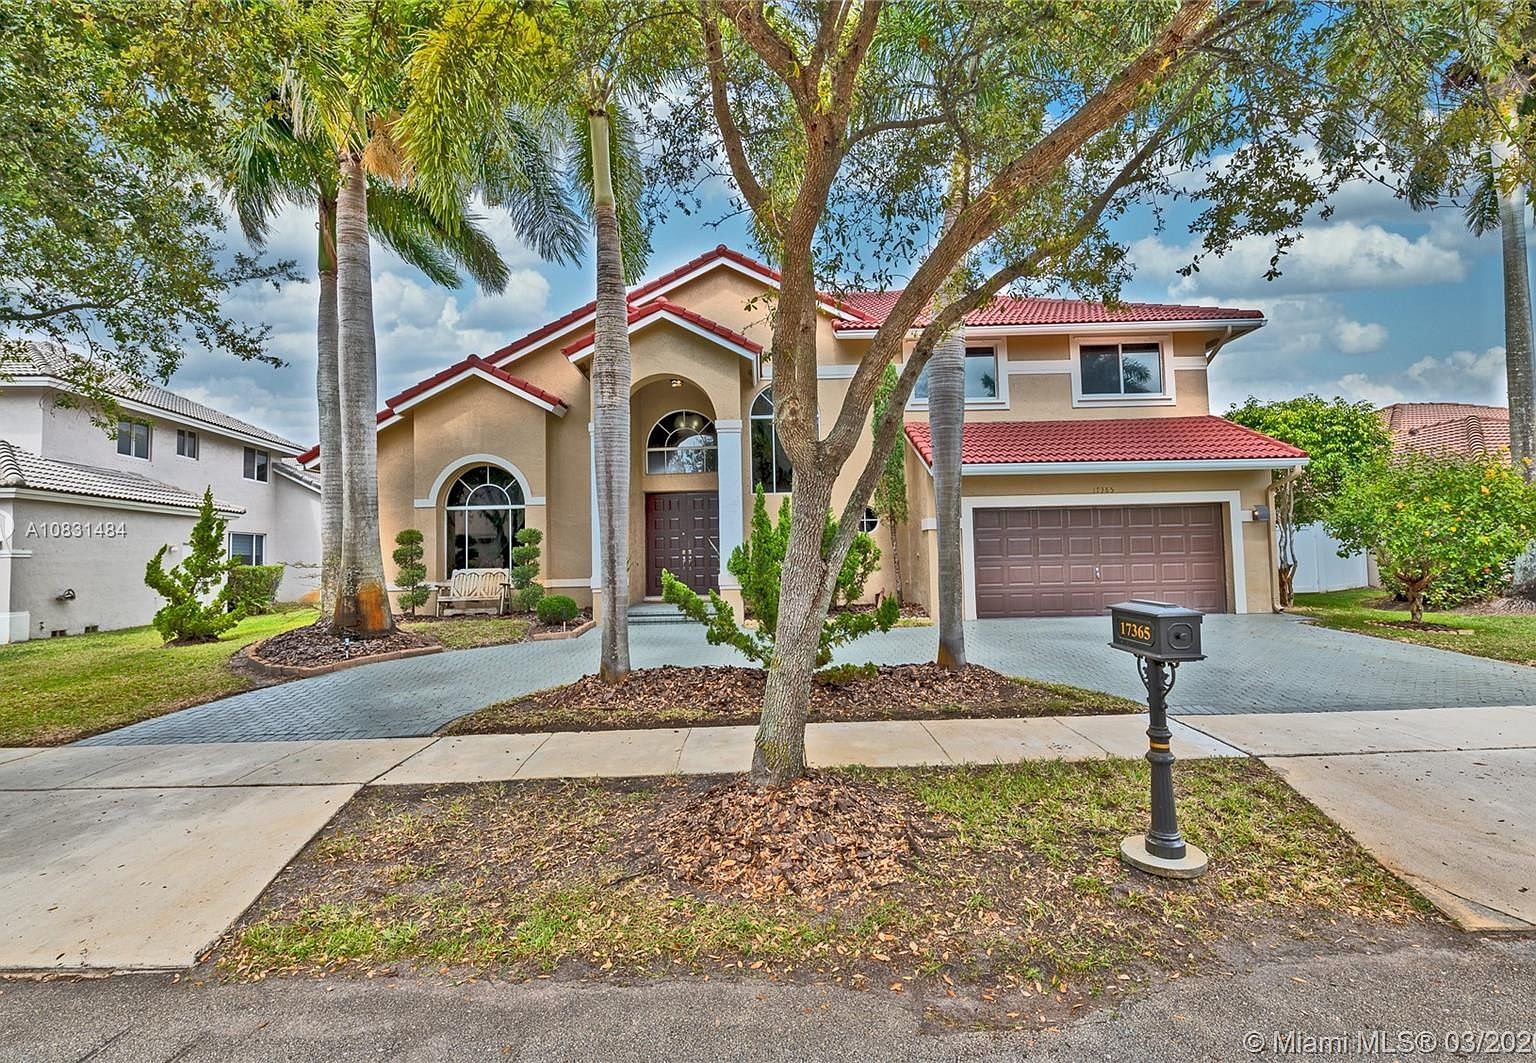 17365 Sw 13th St Pembroke Pines Fl 33029 Zillow - wwwrobloxcom site is not usable issue 17365